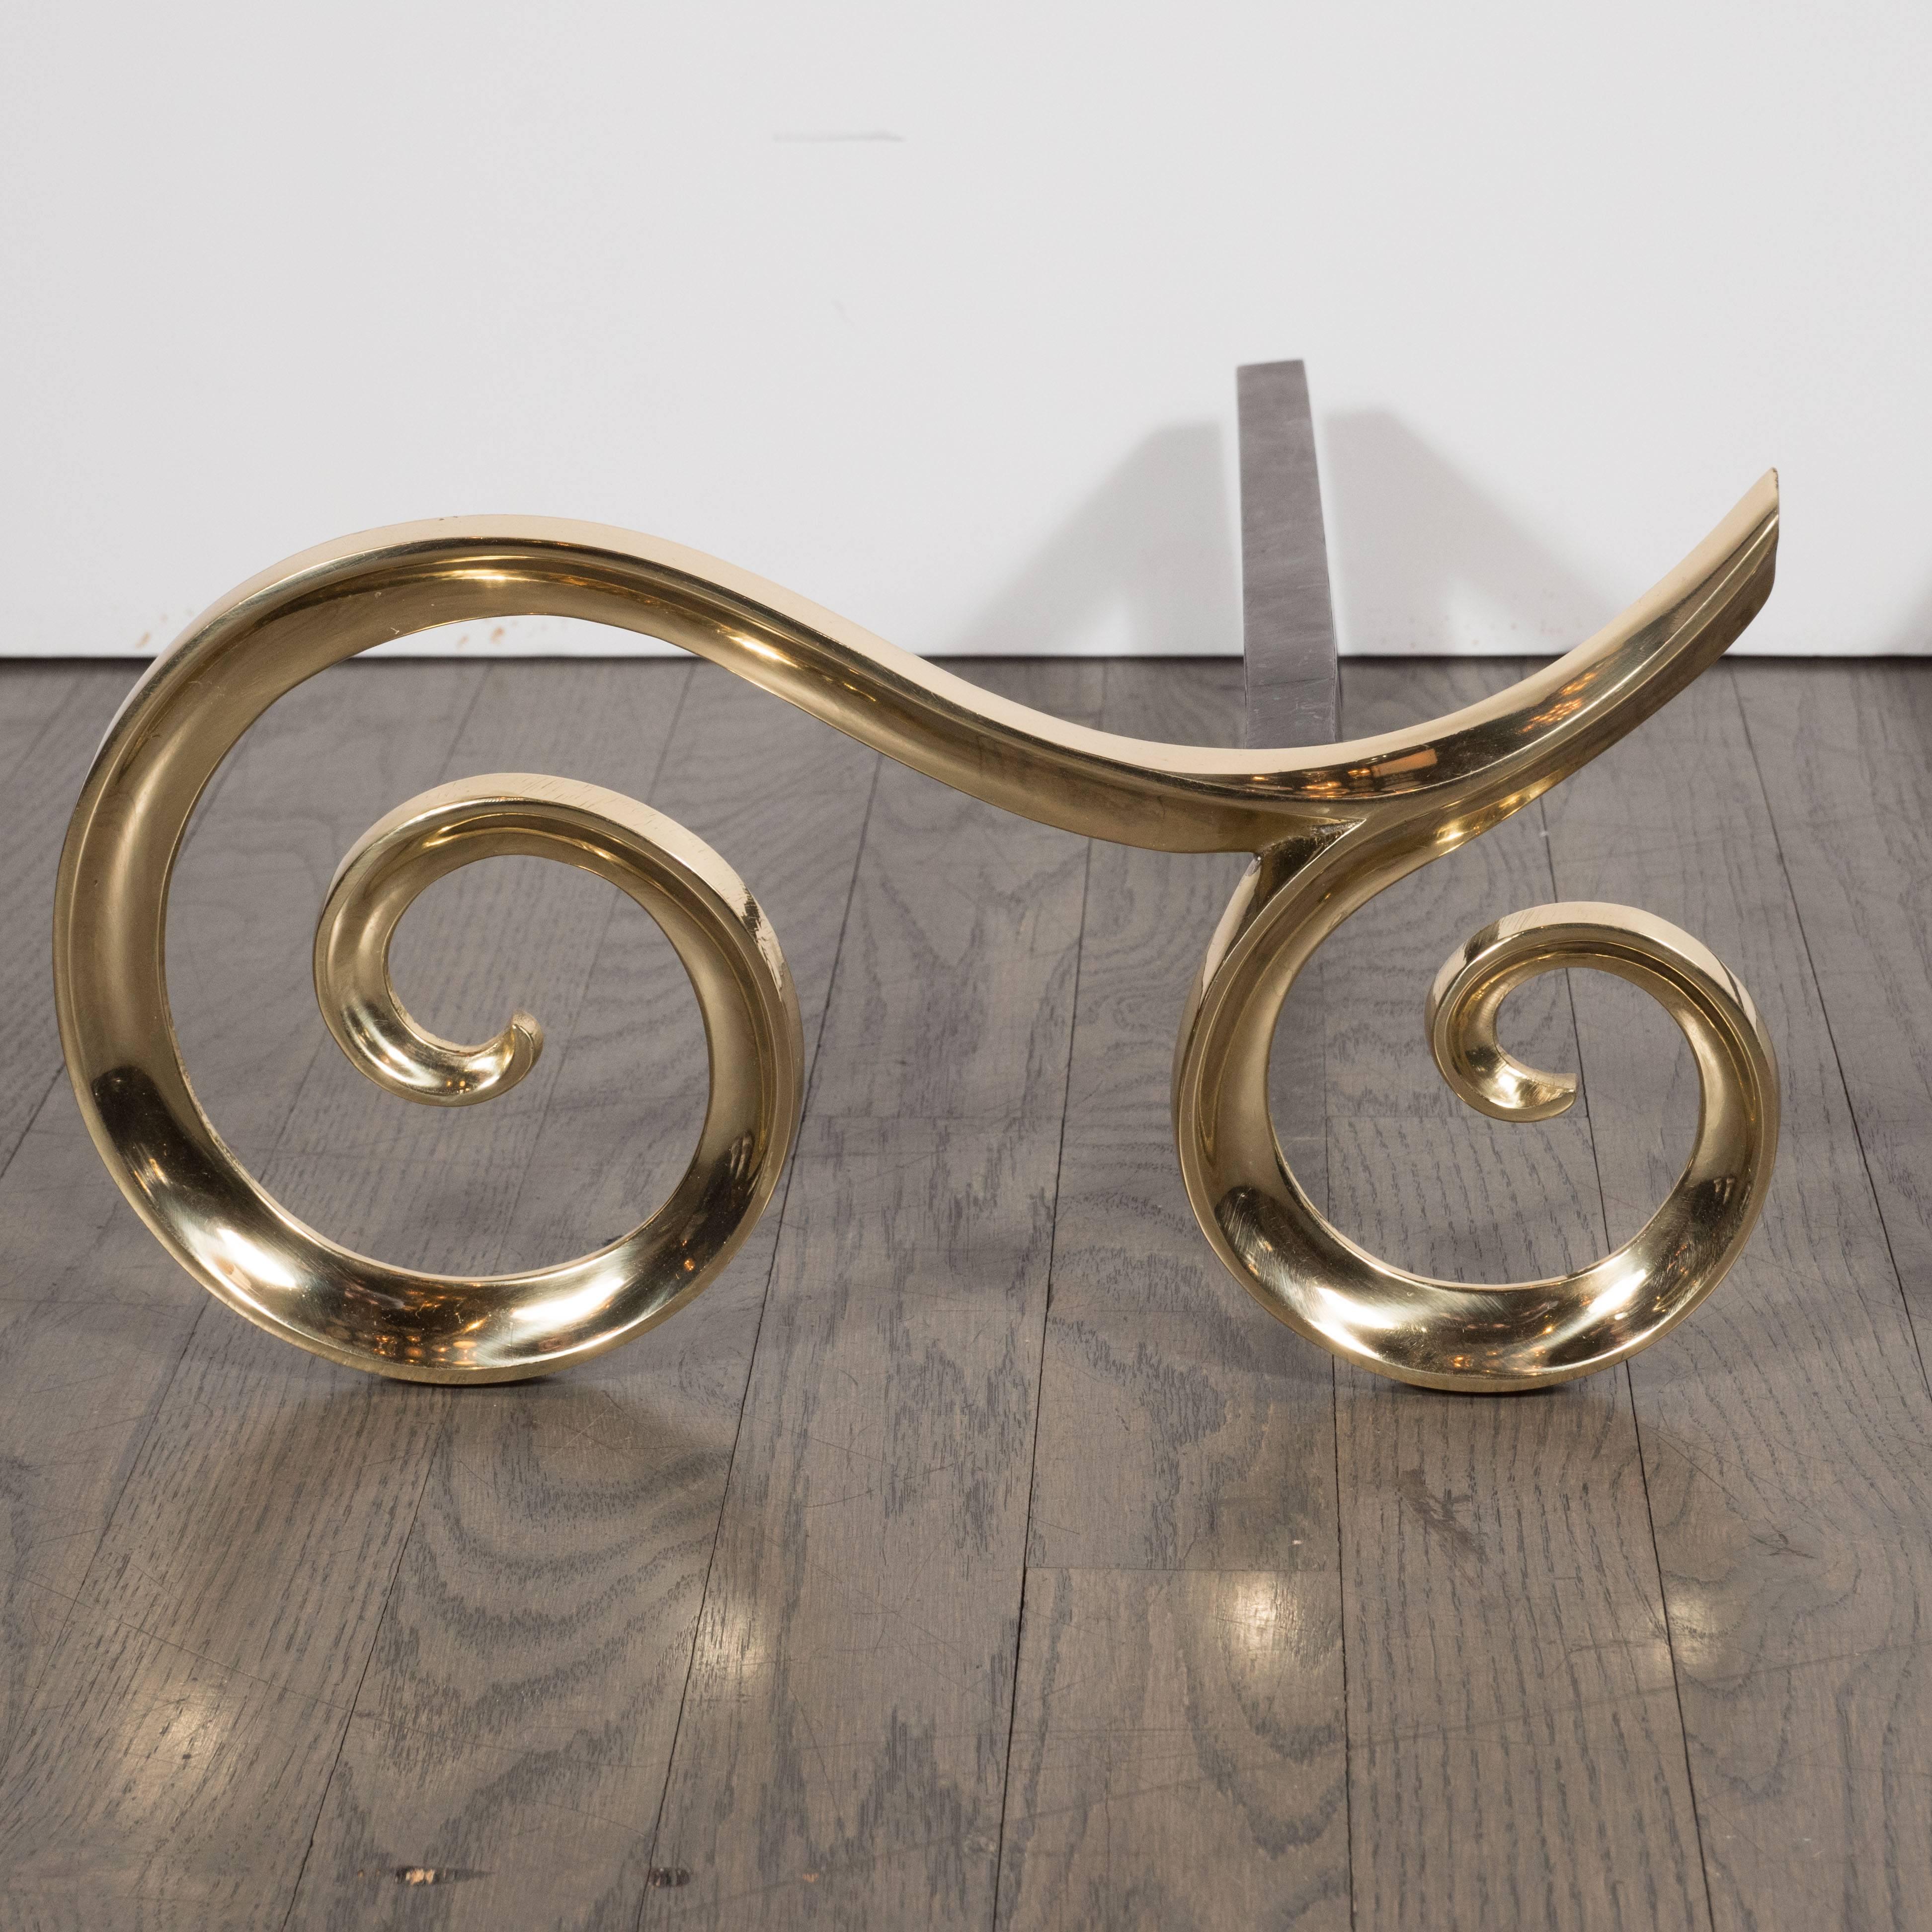 These elegant andirons feature scroll form fronts in lustrous brass and geometrically formed brackets in black iron. With their clean lines, classically inspired form, and luxurious materials, these andirons would be a wonderful addition to any